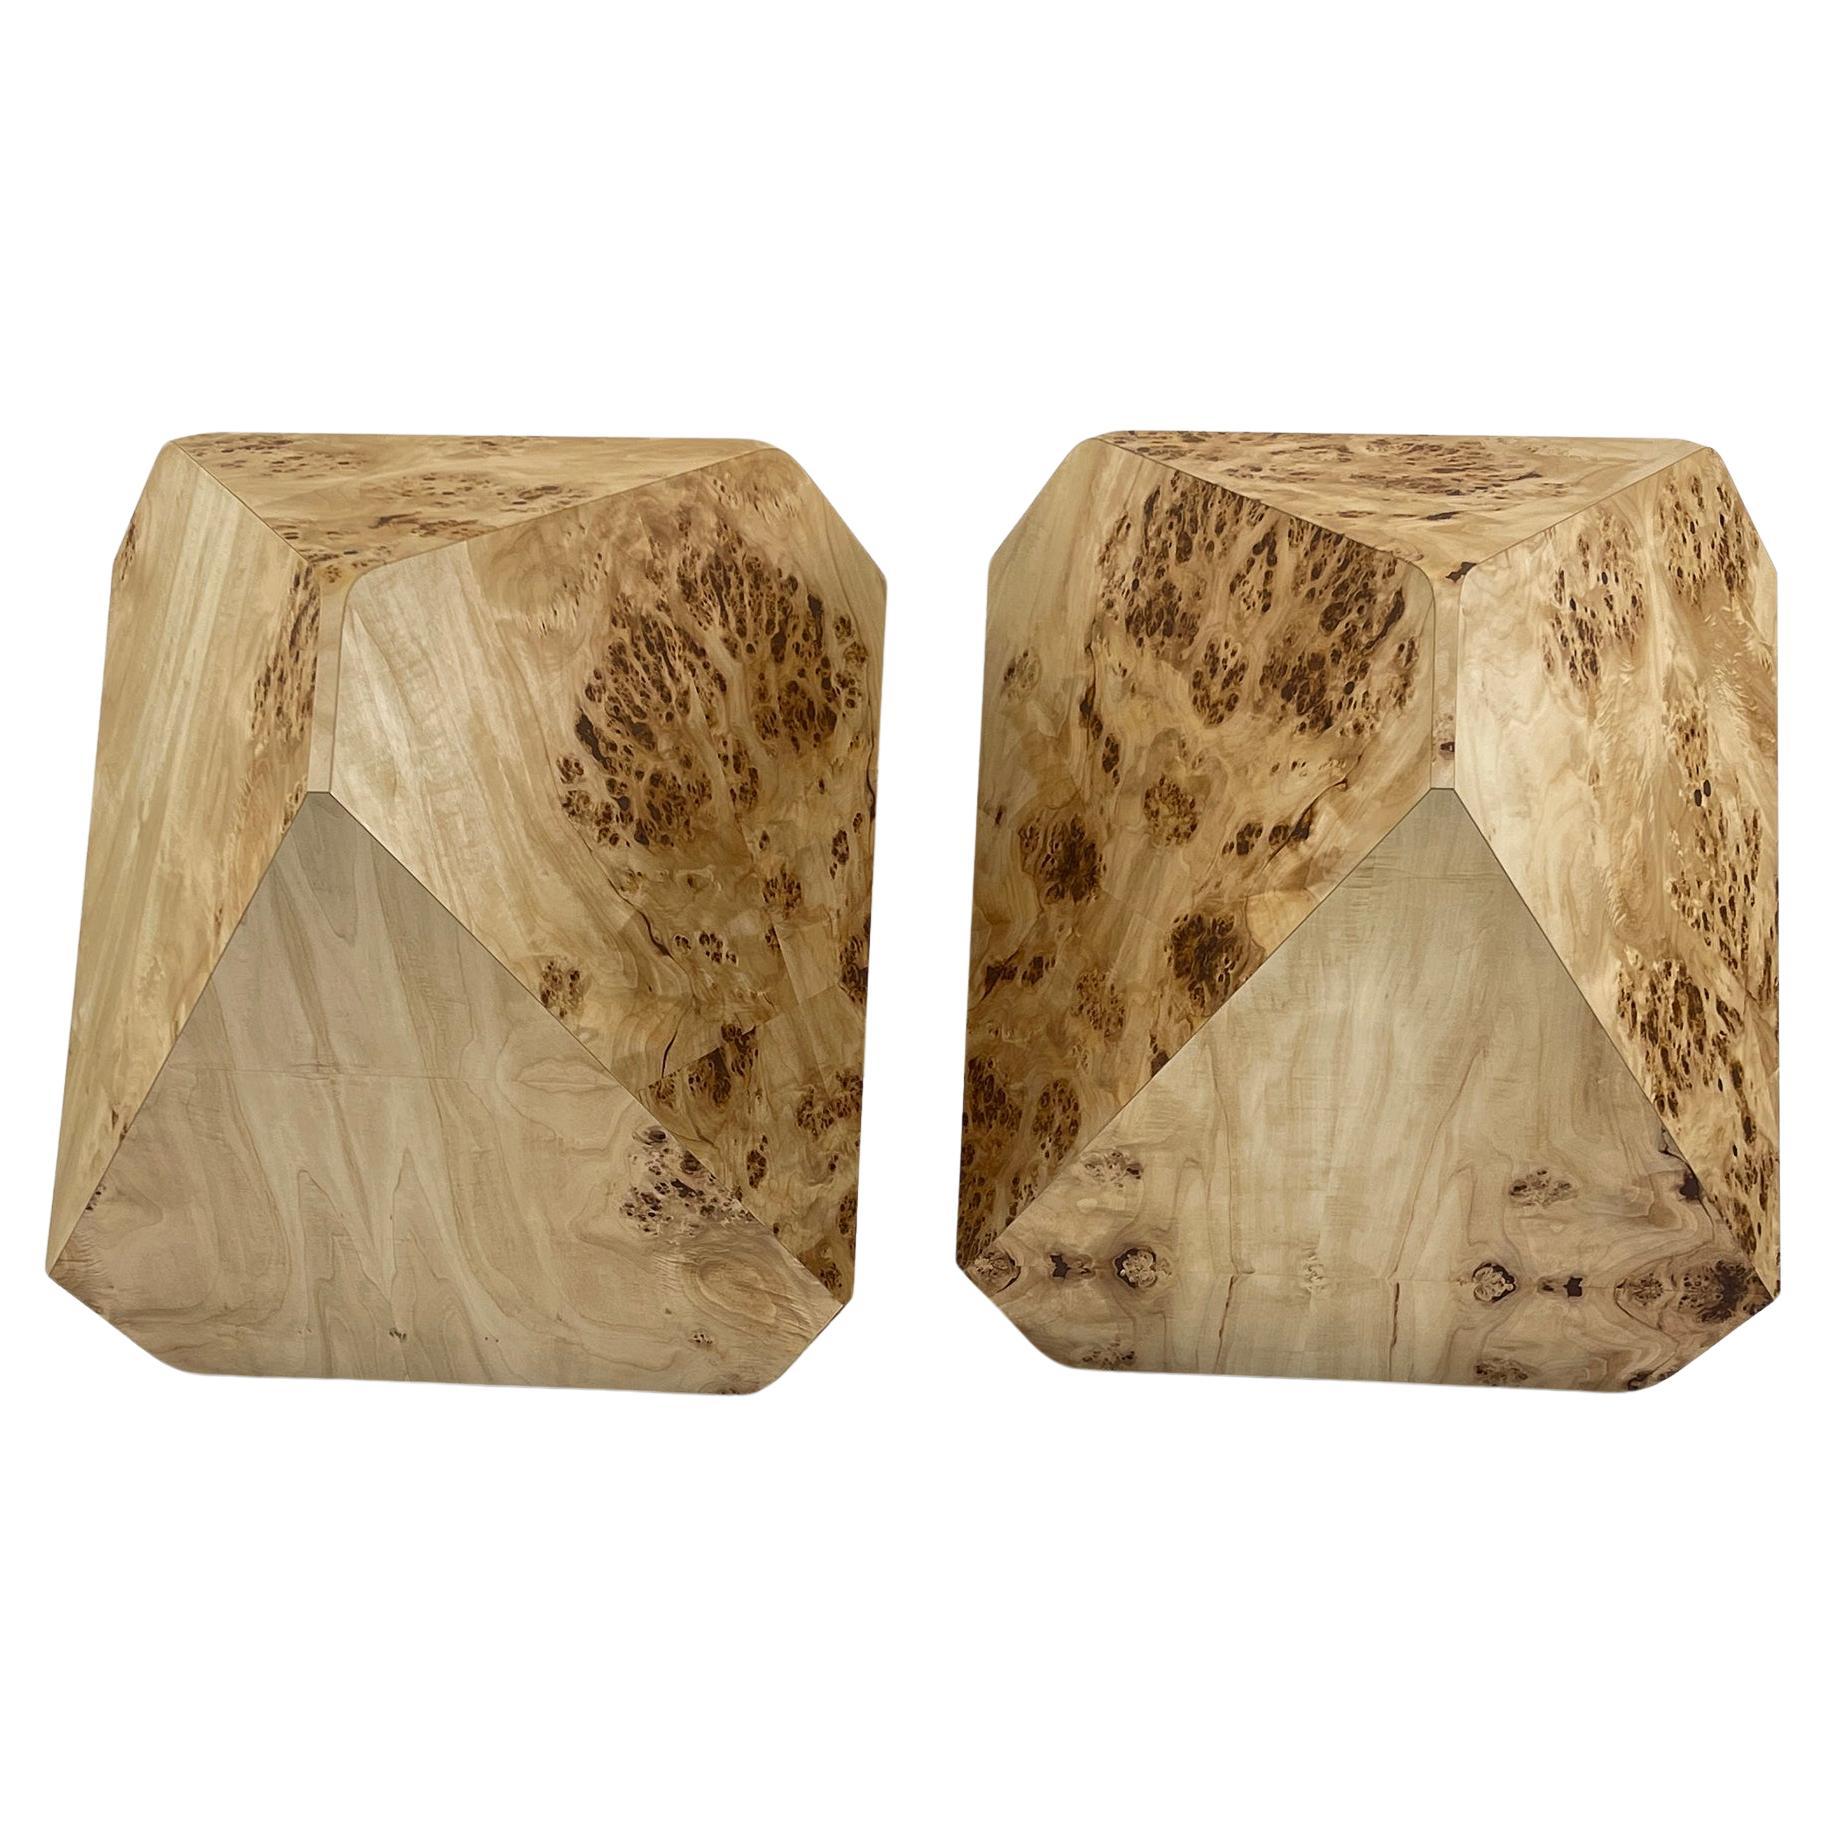 William Earle's iconic 'hal' dining pedestals in European Mappa burl